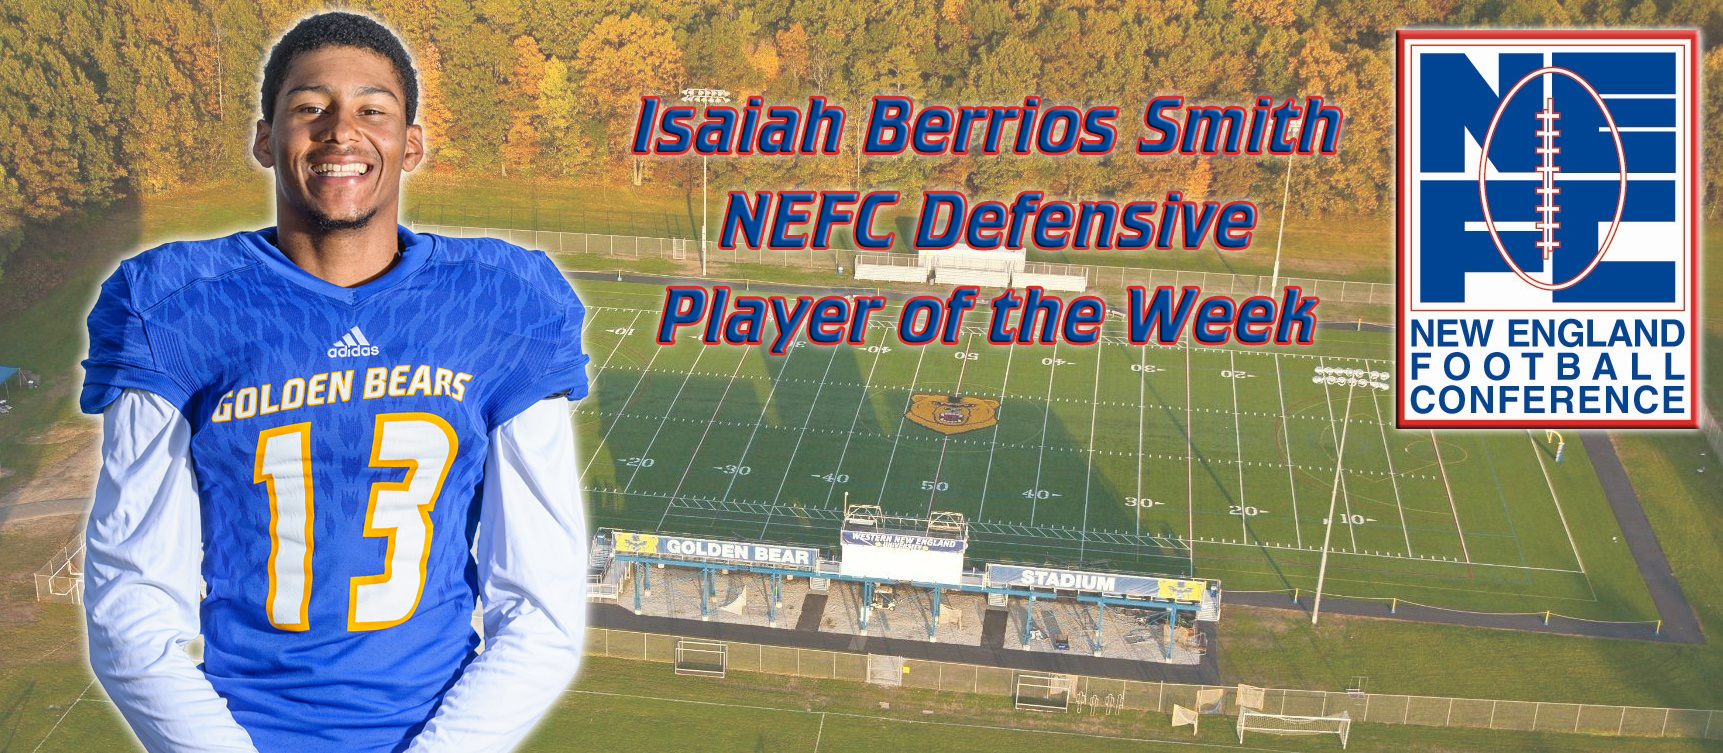 Berrios Smith Named NEFC Defensive Player of the Week